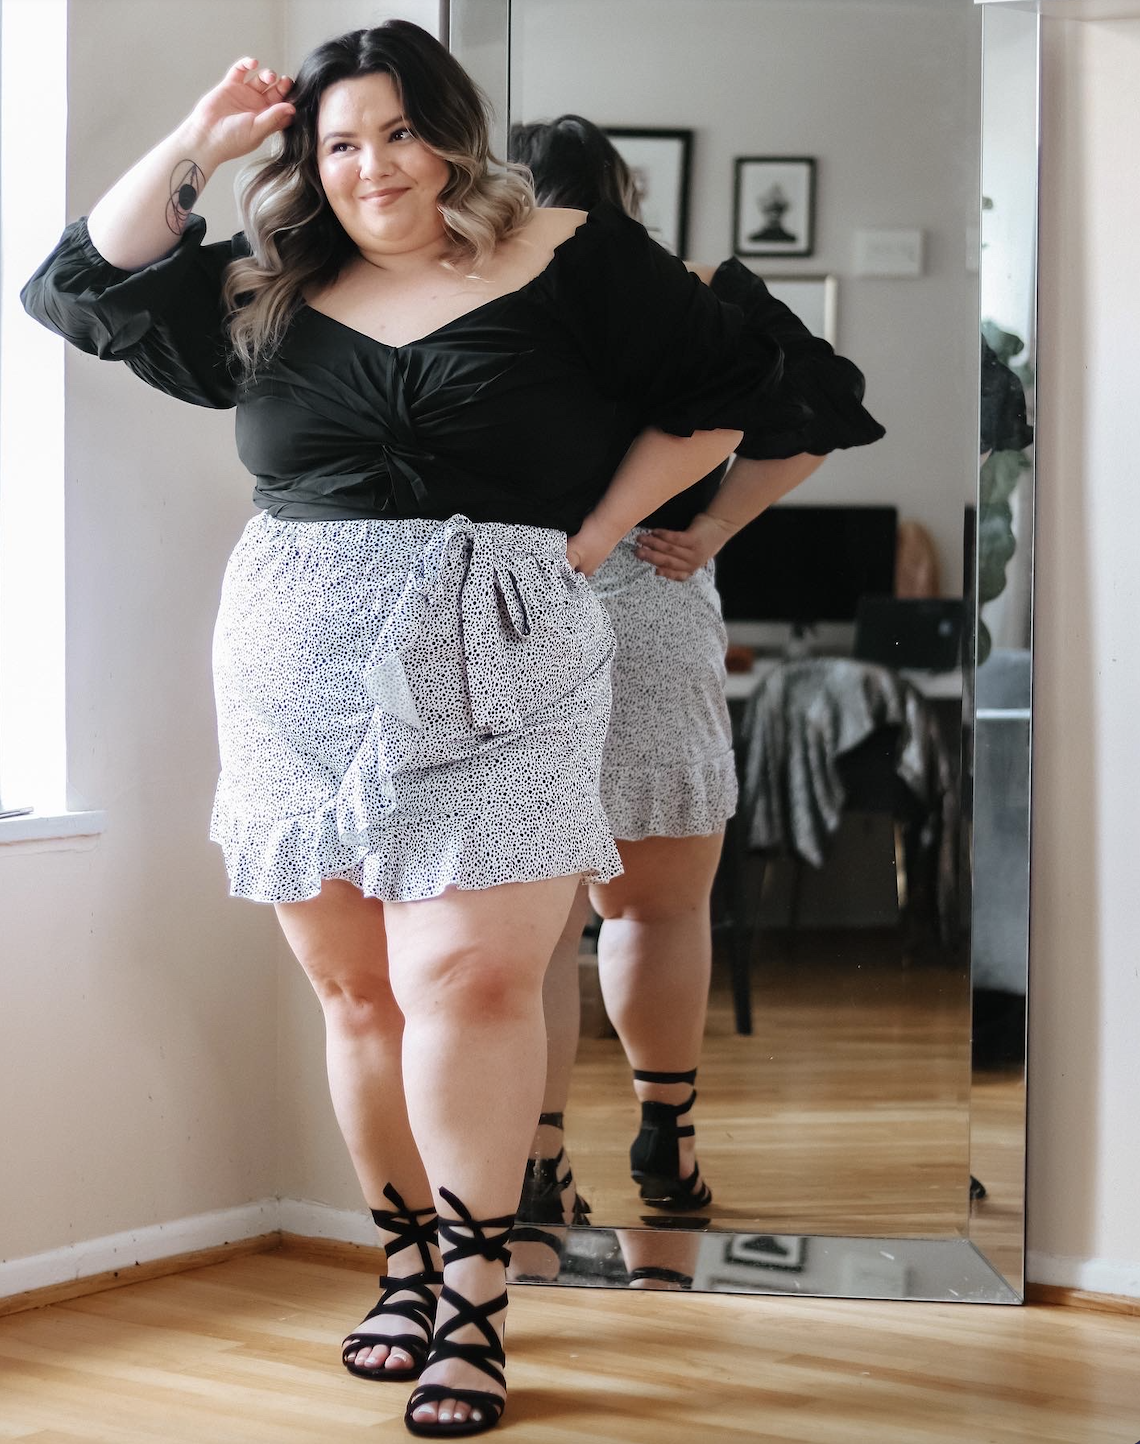 Plus Size Shopping at SHEIN - Natalie in the City